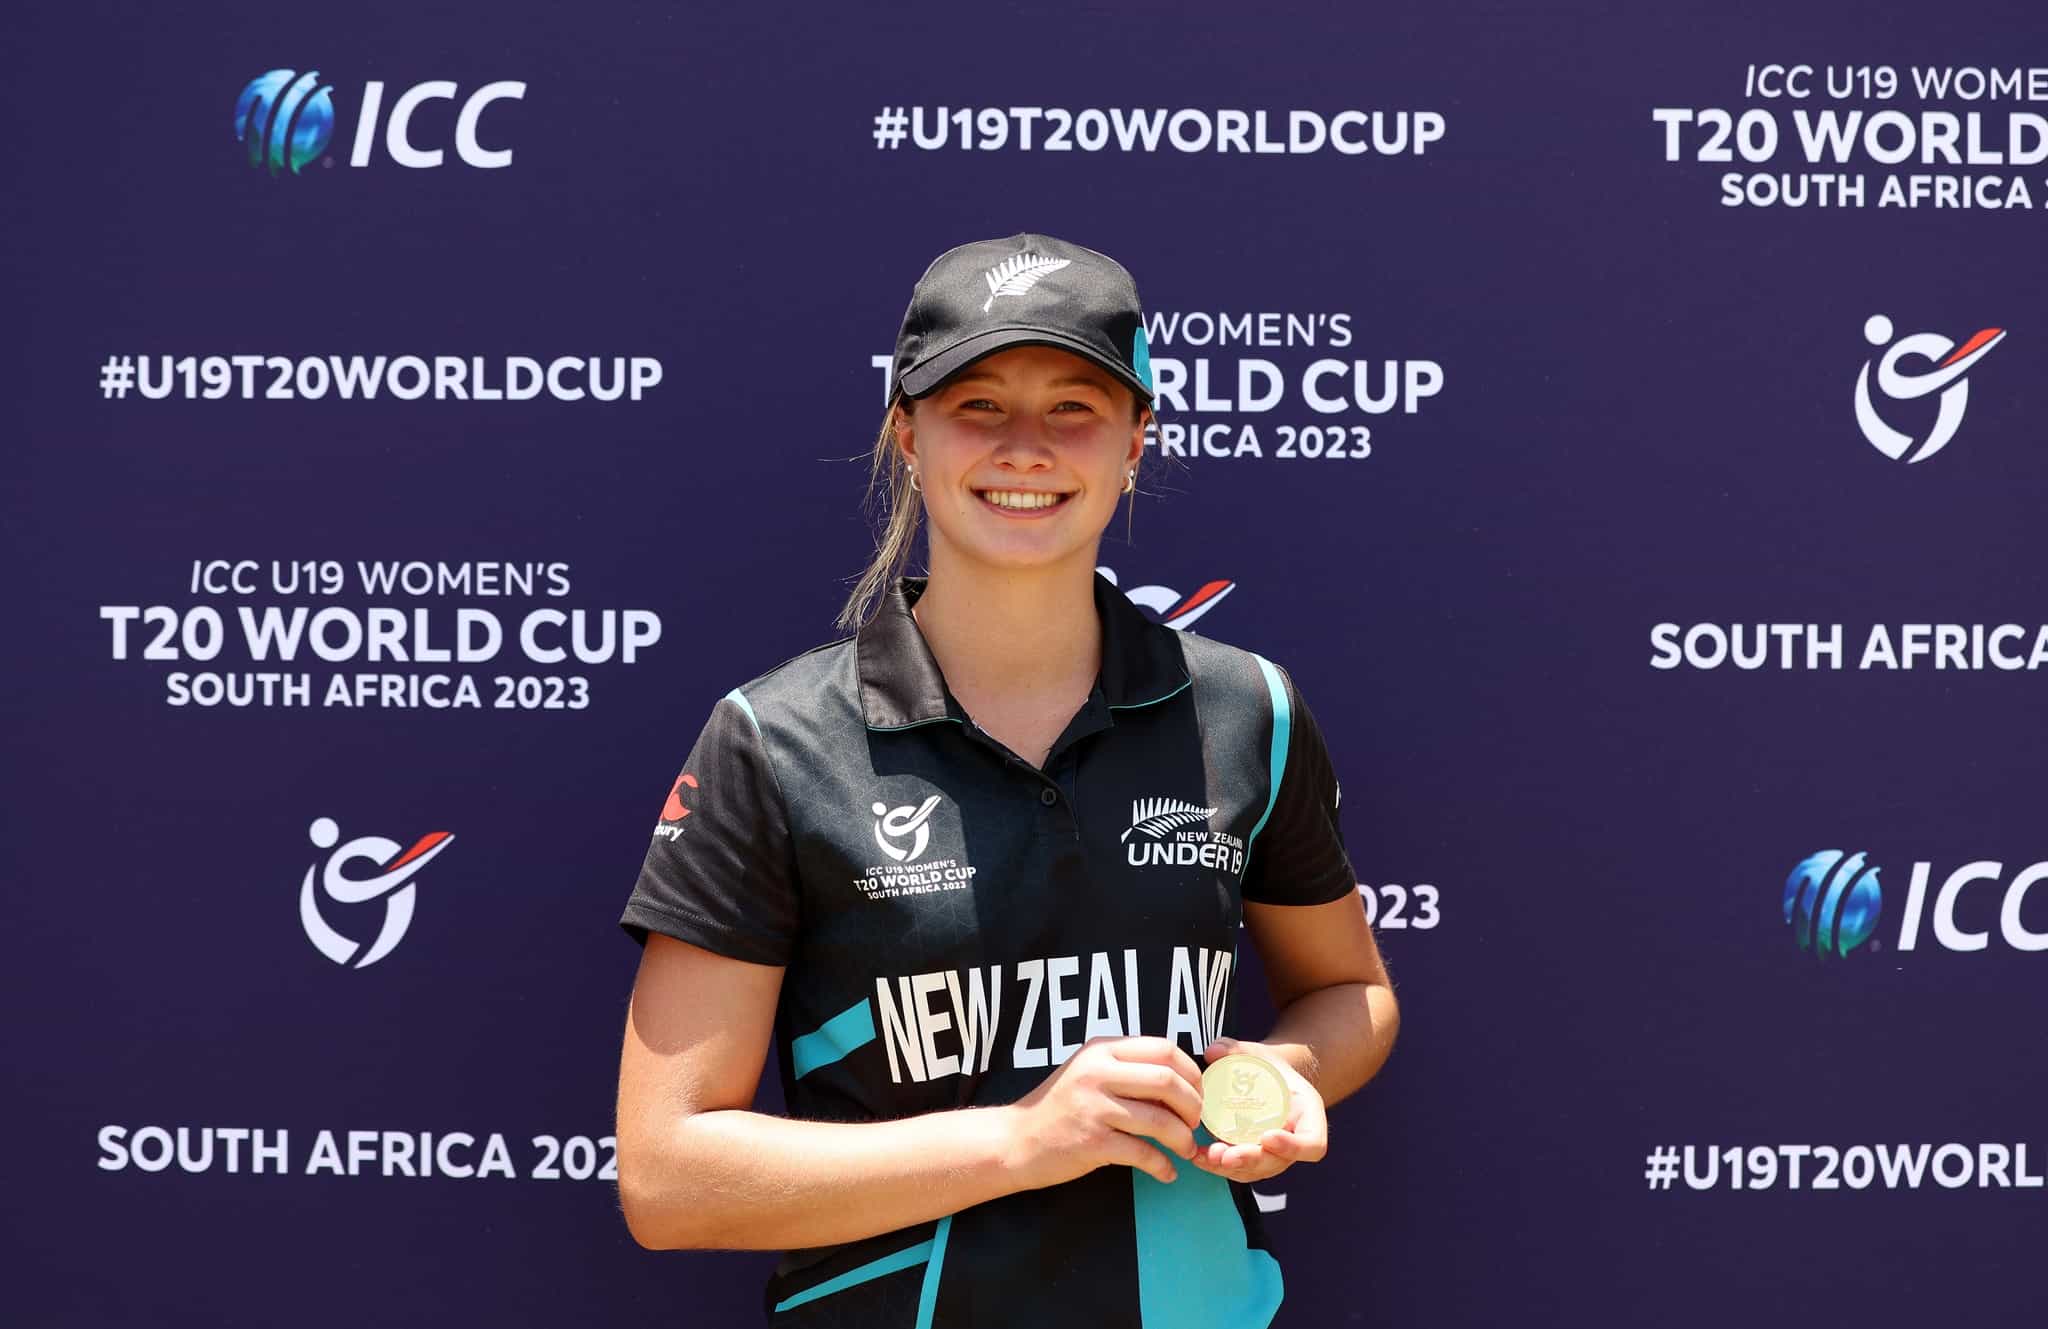 POTCHEFSTROOM, SOUTH AFRICA - JANUARY 21: Emma McLeod of New Zealand poses after being named Player of the Match following the ICC Women's U19 T20 World Cup 2023 Super 6 match between Rwanda and New Zealand at North-West University Oval on January 21, 2023 in Potchefstroom, South Africa. (Photo by Nathan Stirk-ICC/ICC via Getty Images)